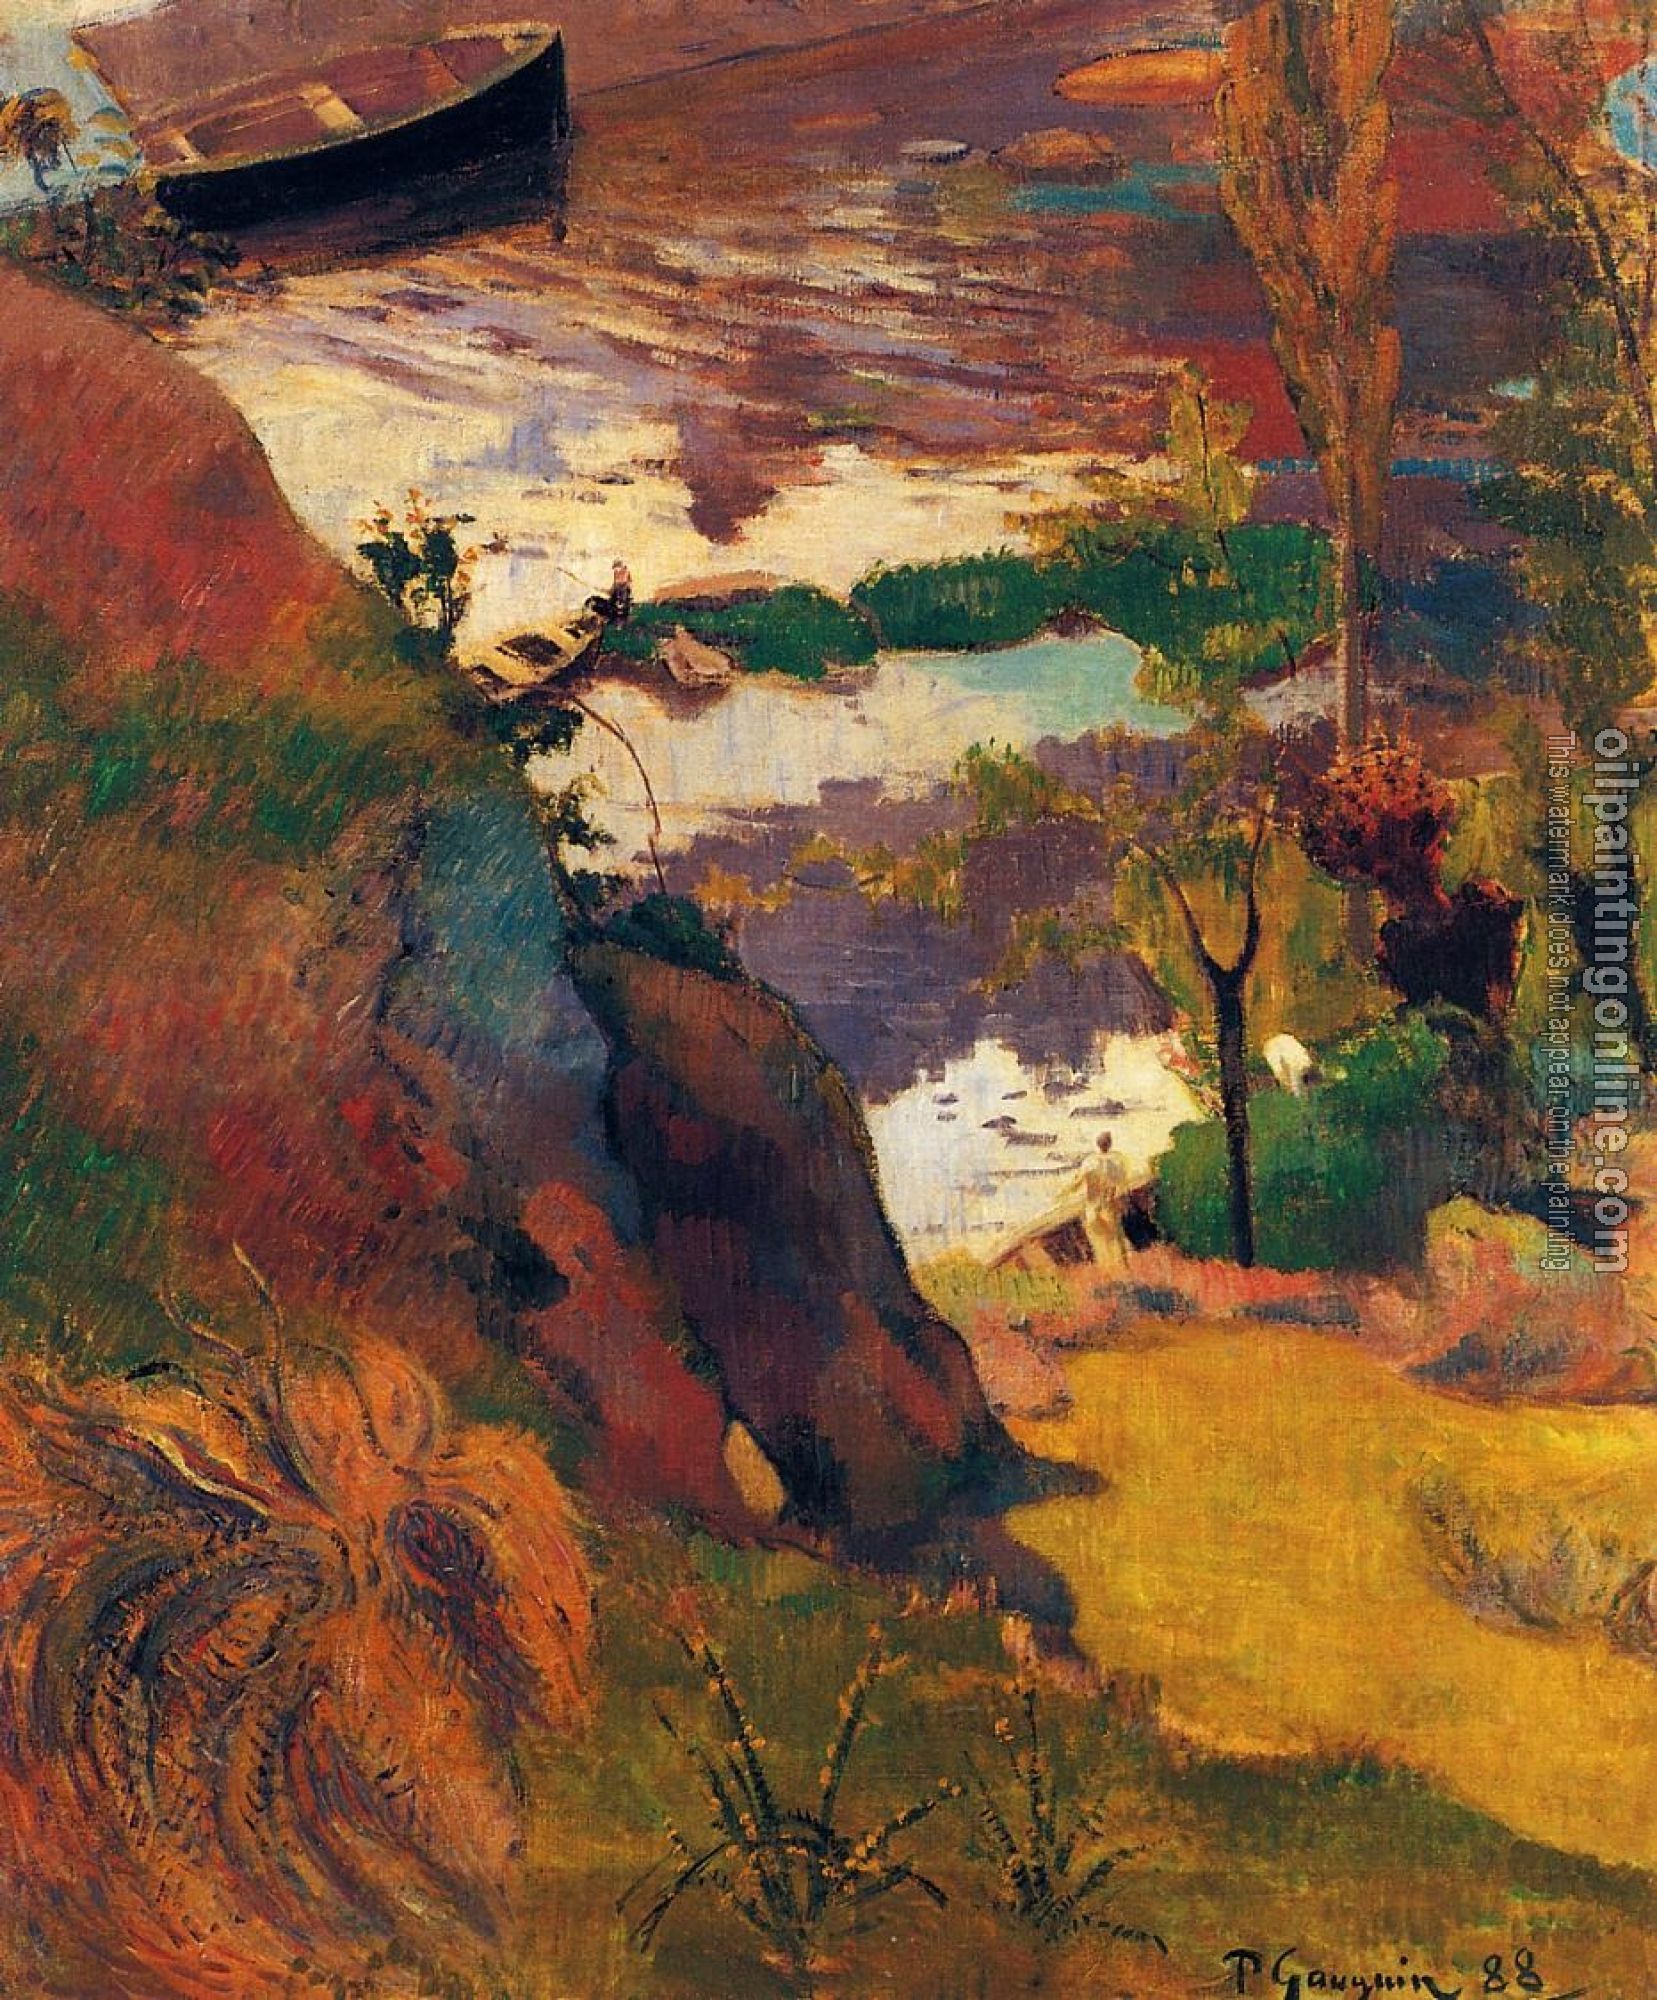 Gauguin, Paul - Fishermen and Bathers on the Aven